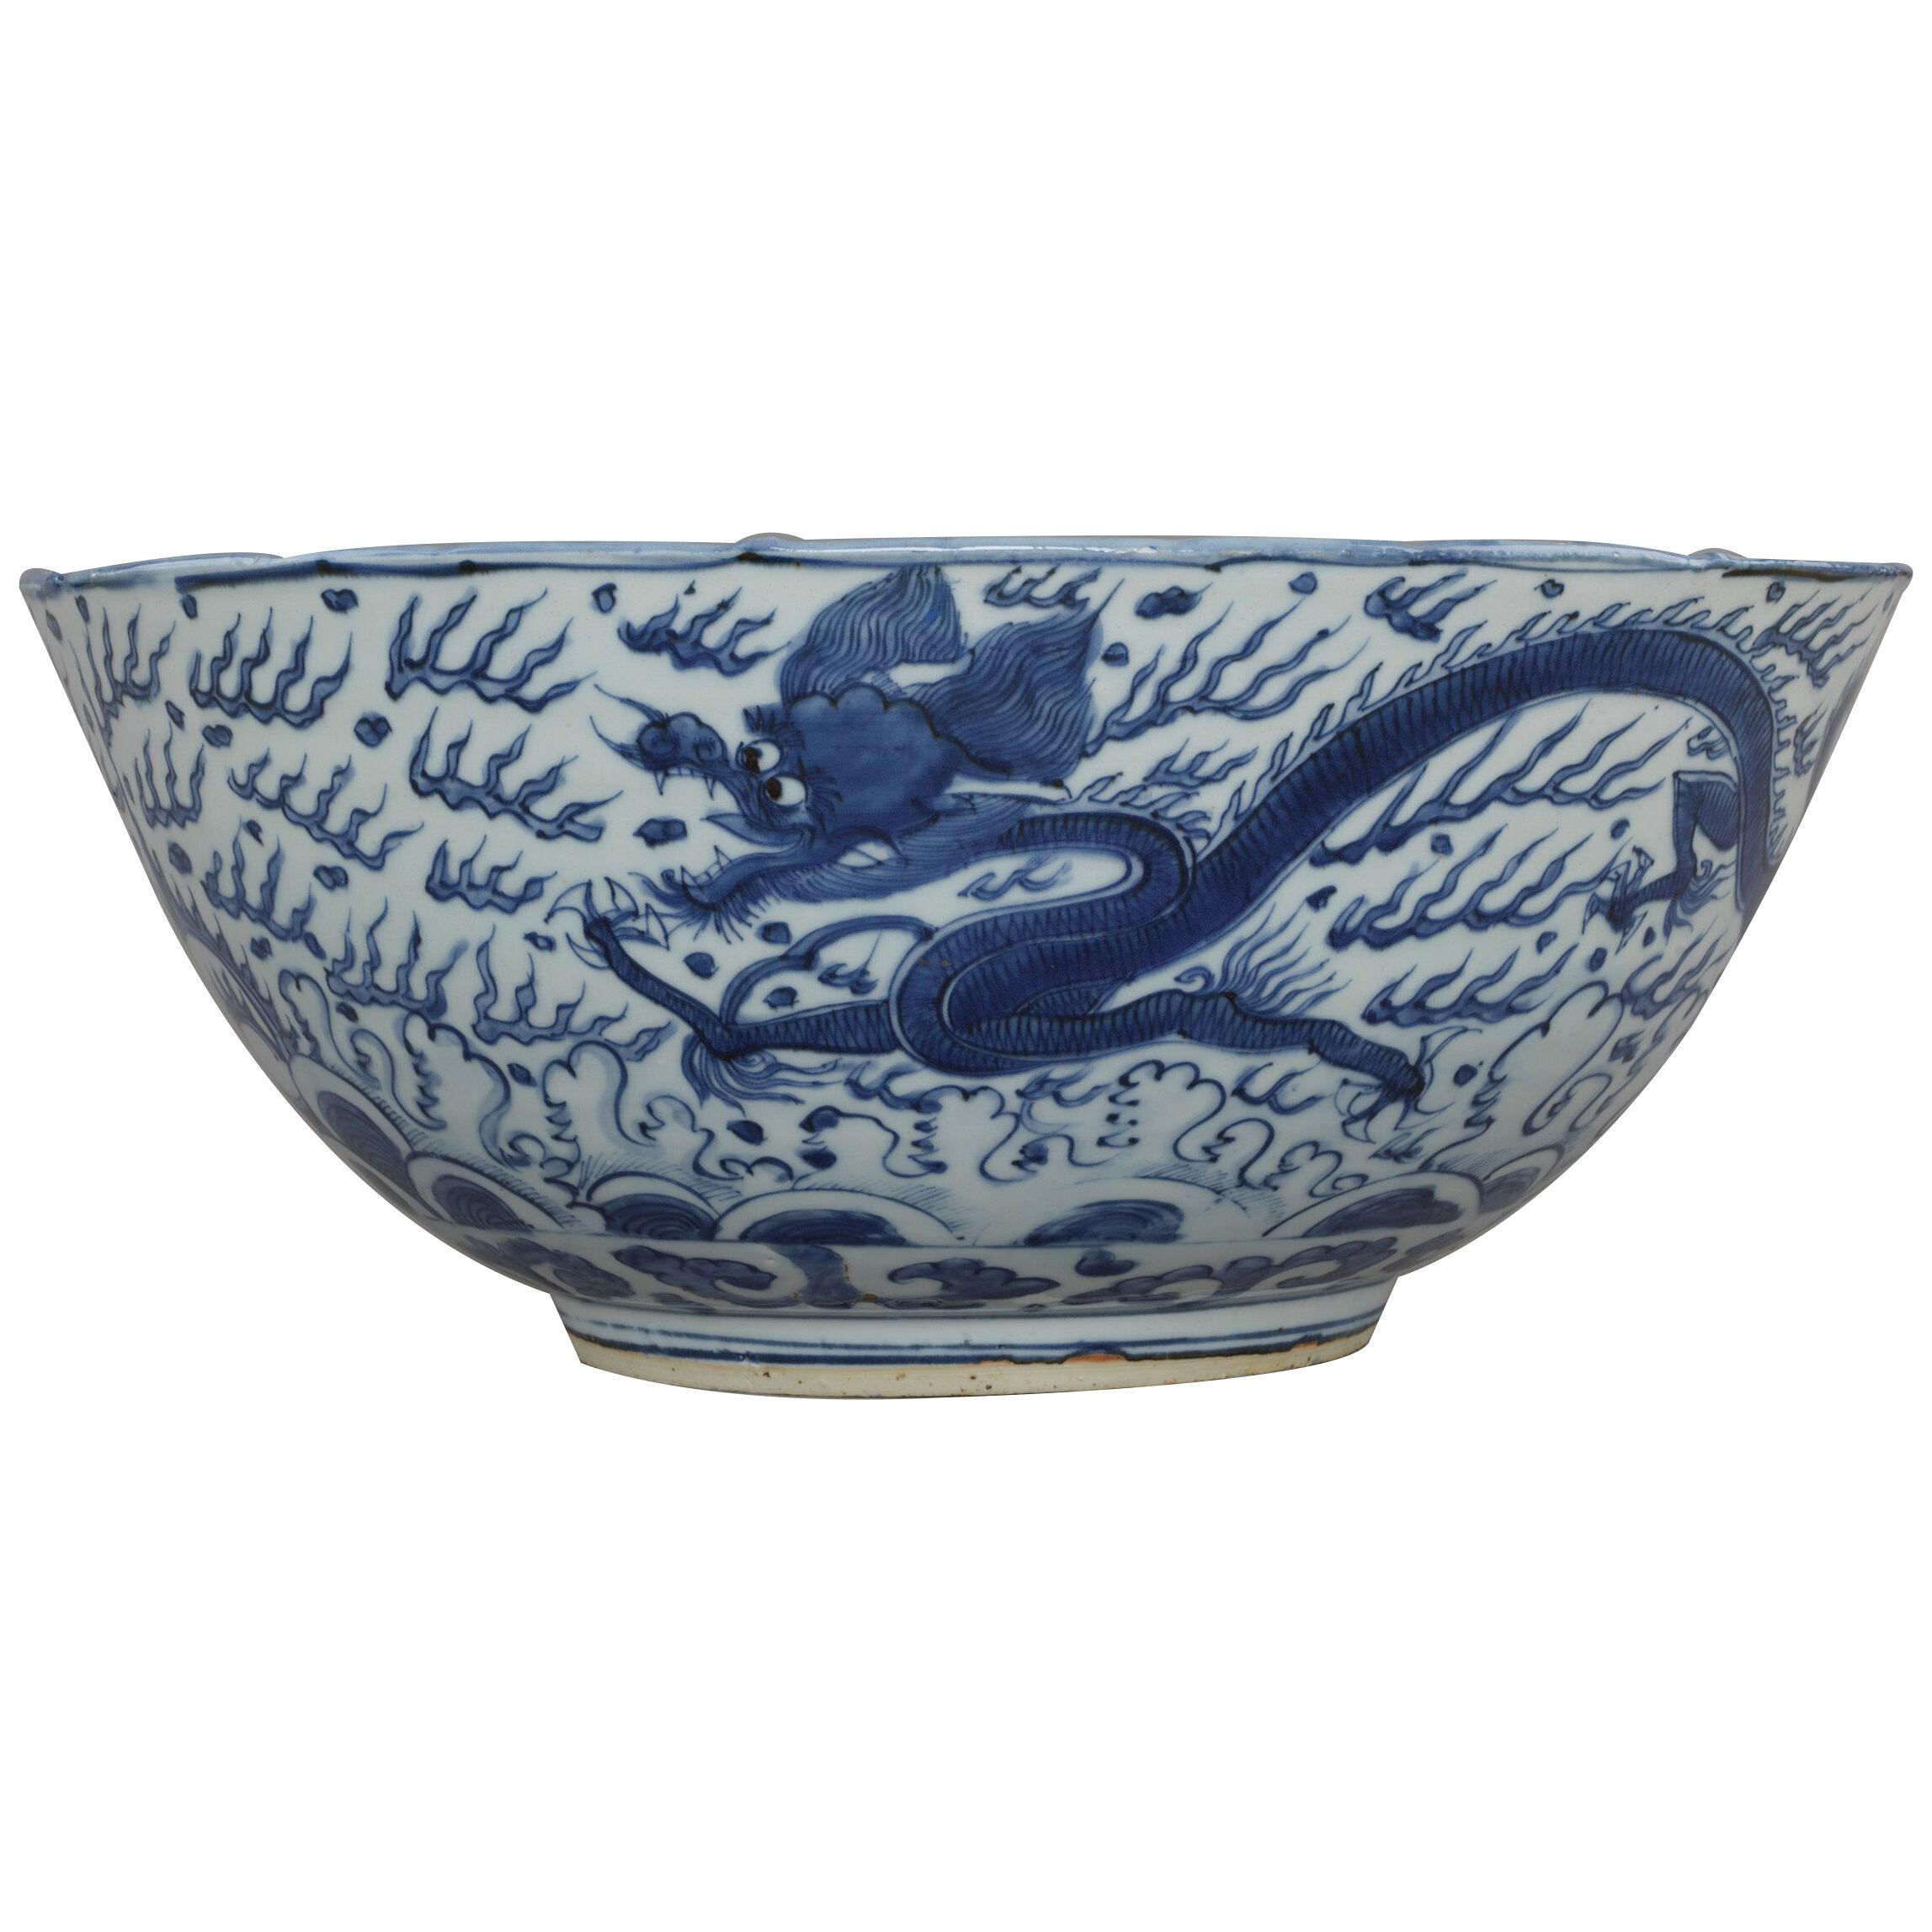 Chinese porcelain blue and white 'dragon and phoenix' bowl